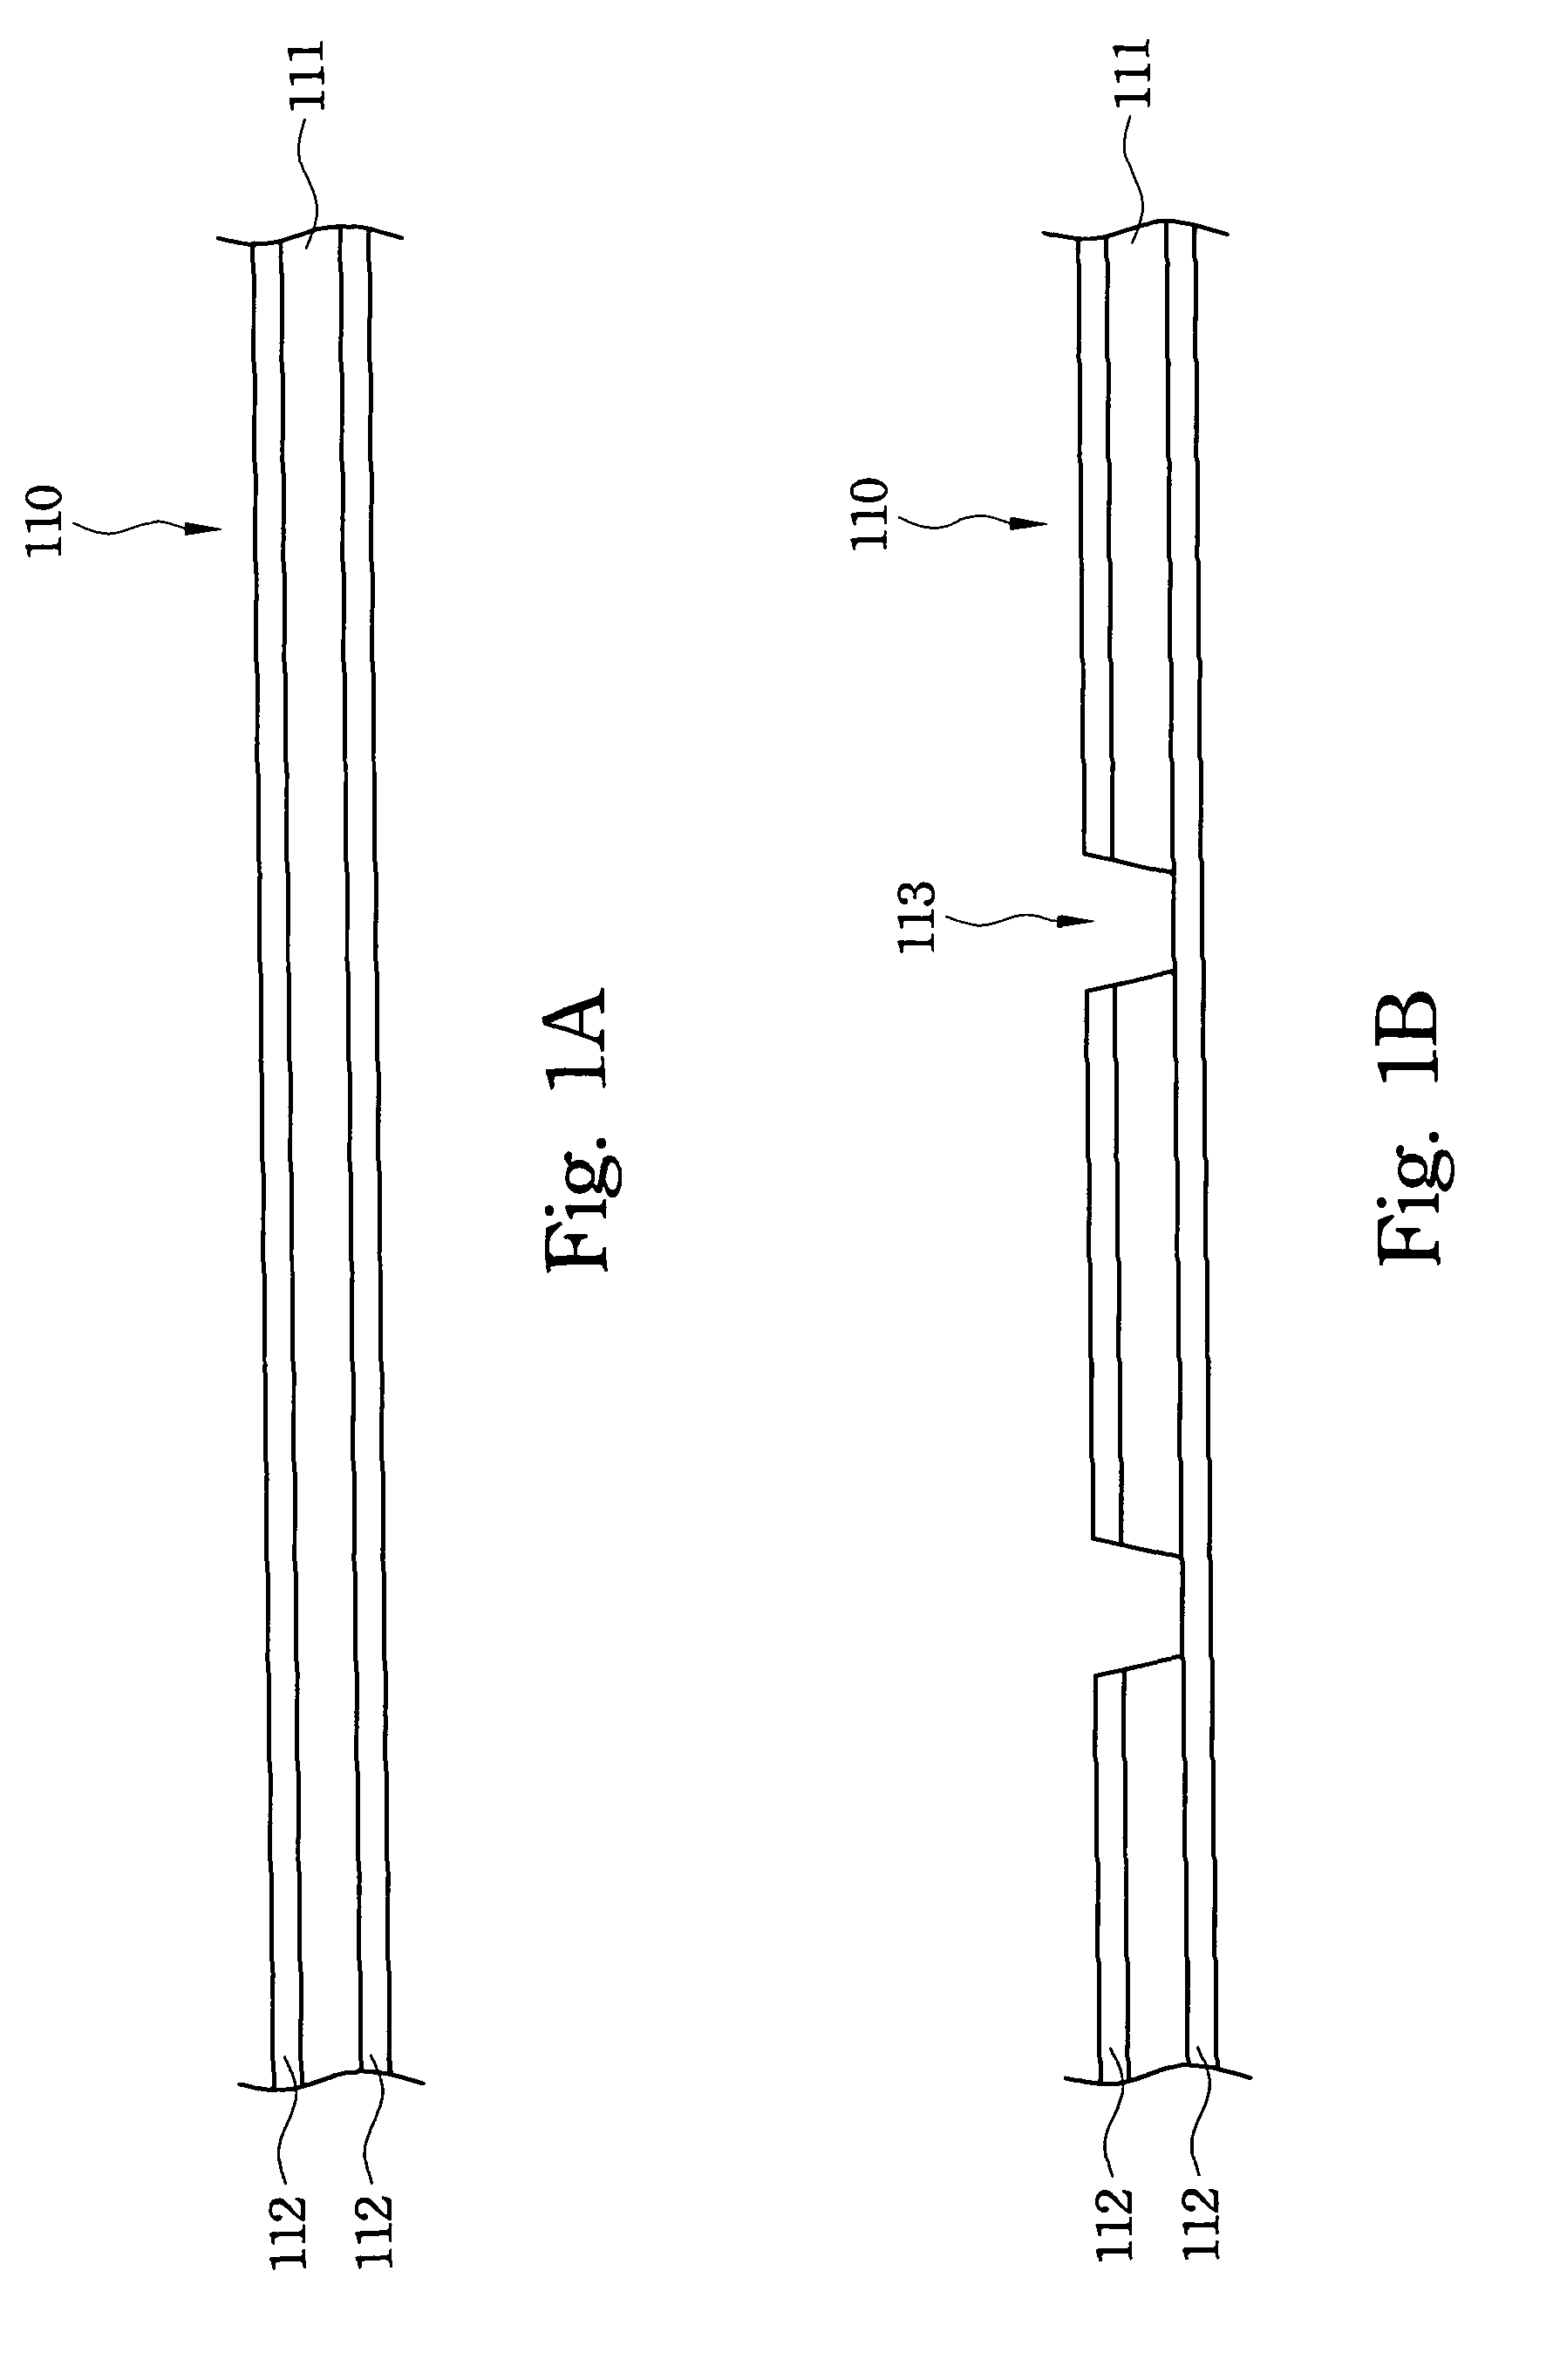 Manufacturing method for integrating passive component within substrate